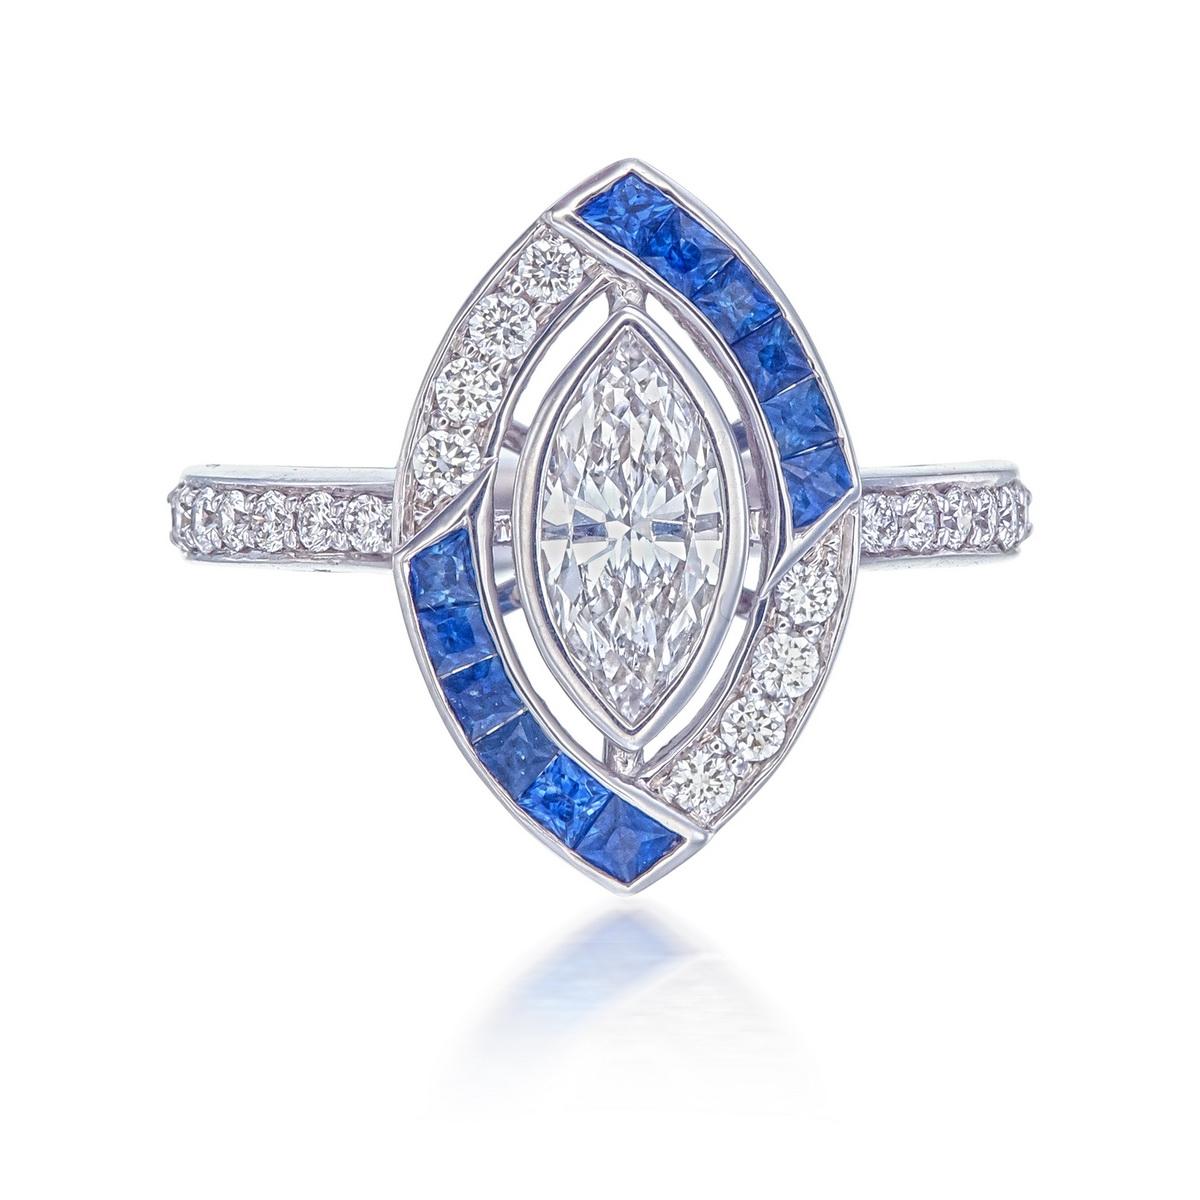 A brand new diamond and blue sapphire ring in 18 Karat white gold. This modern vintage ring's design was inspired by art deco themes. 

The centre marquise diamond is approximately 0.67 carat and H-I colour and VS clarity. 

The ring also has 22